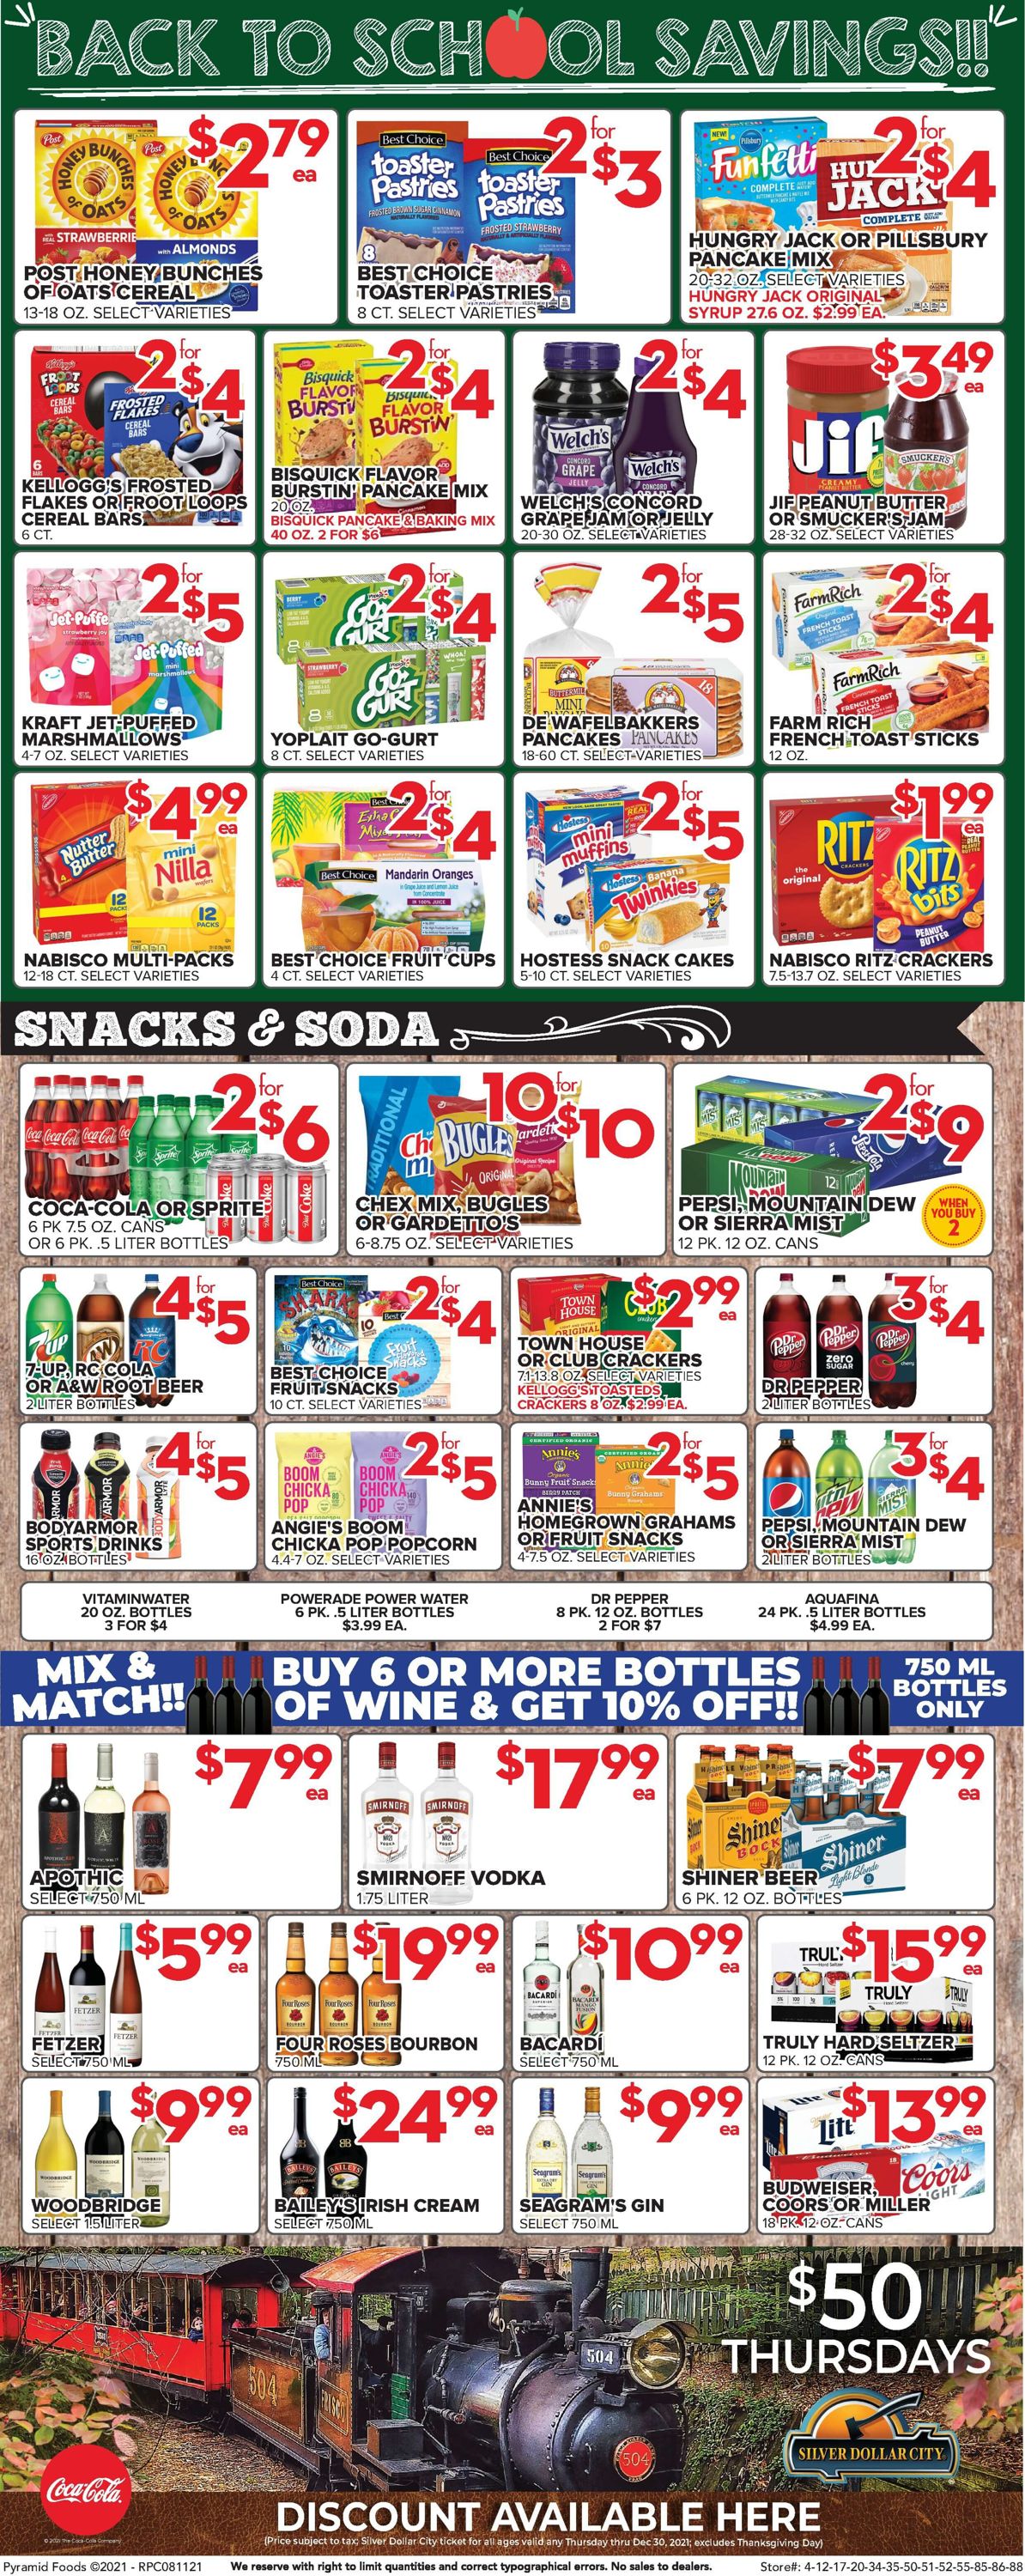 Price Cutter Weekly Ad Circular - valid 08/11-08/17/2021 (Page 4)